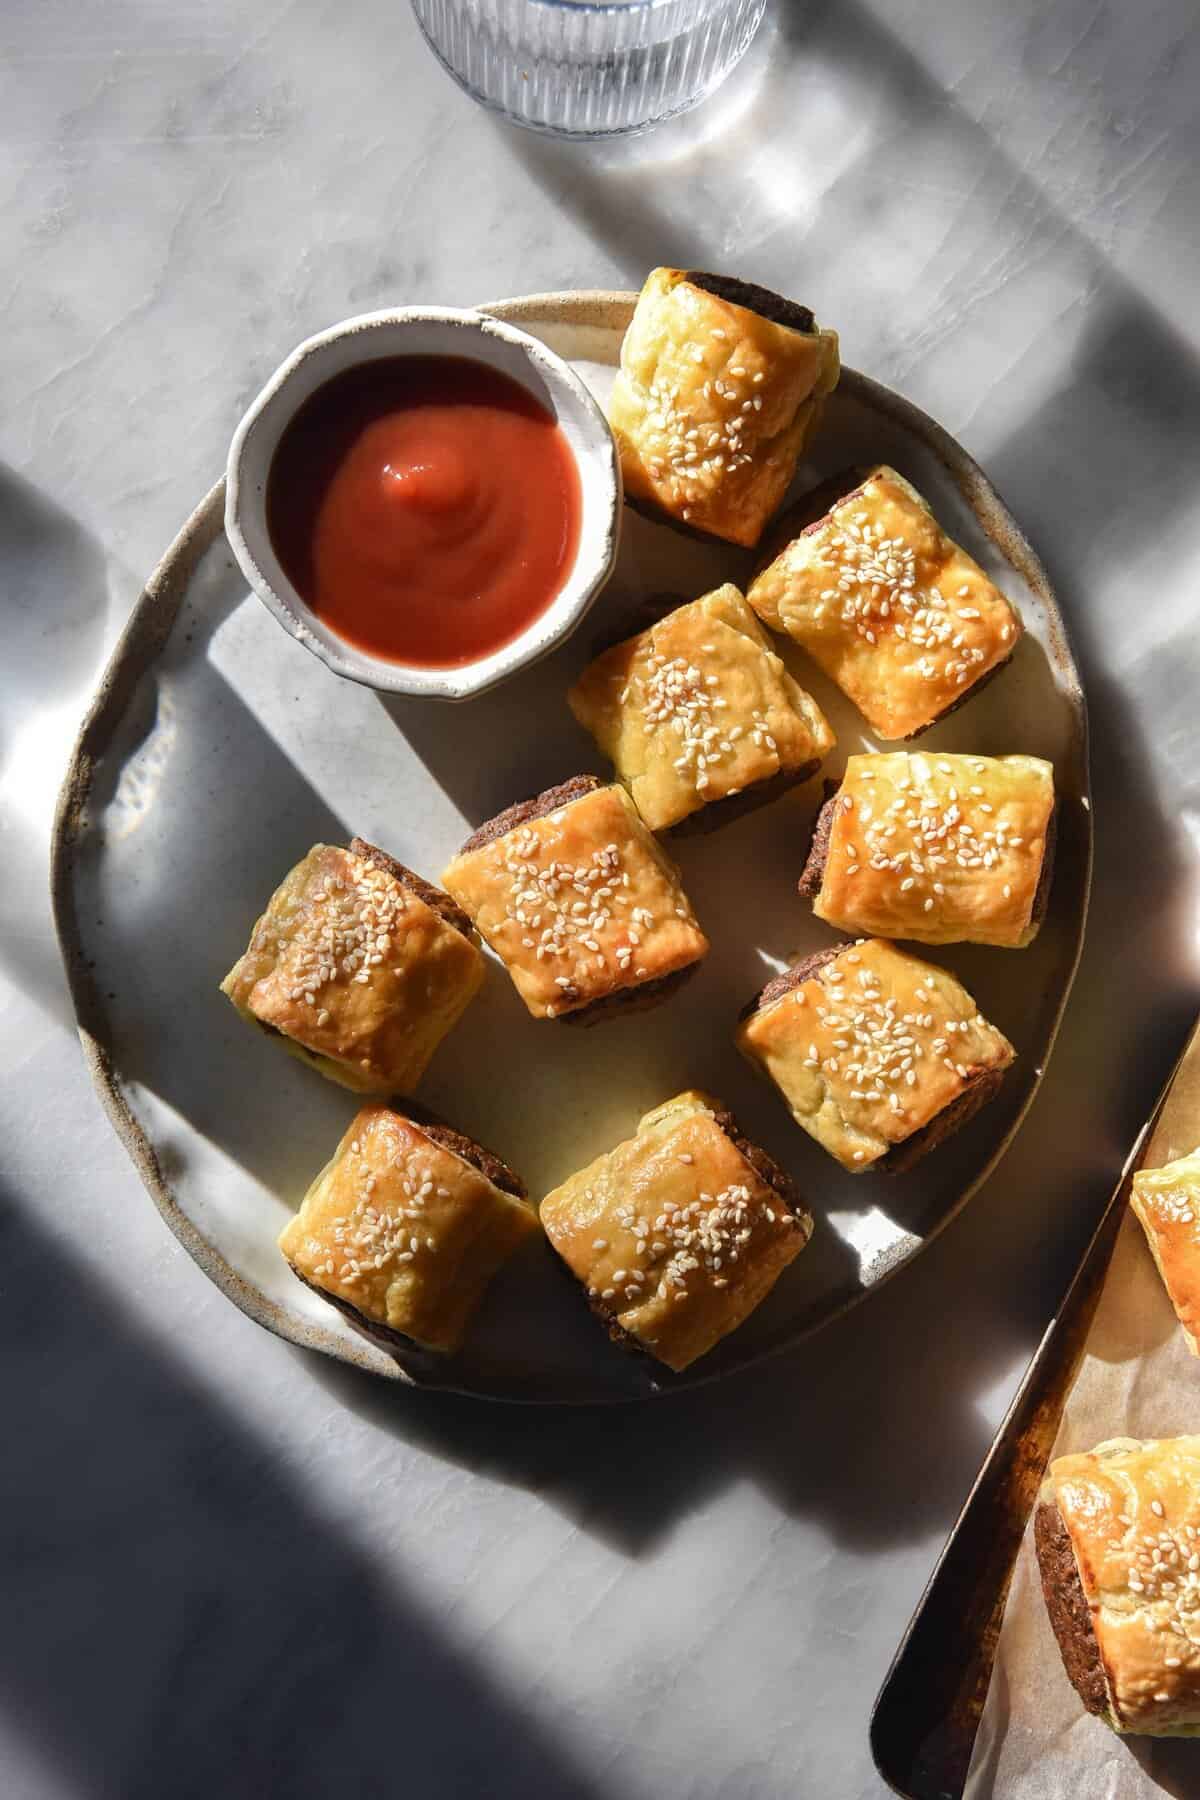 An aerial view of a plate of gluten free, vegetarian or vegan mini sausage rolls. The rolls sit atop a white ceramic plate on a white marble table, and a small bowl of tomato sauce sits in the top corner of the plate. The scene is lit up with harsh sunlight, creating light and shadow across the table